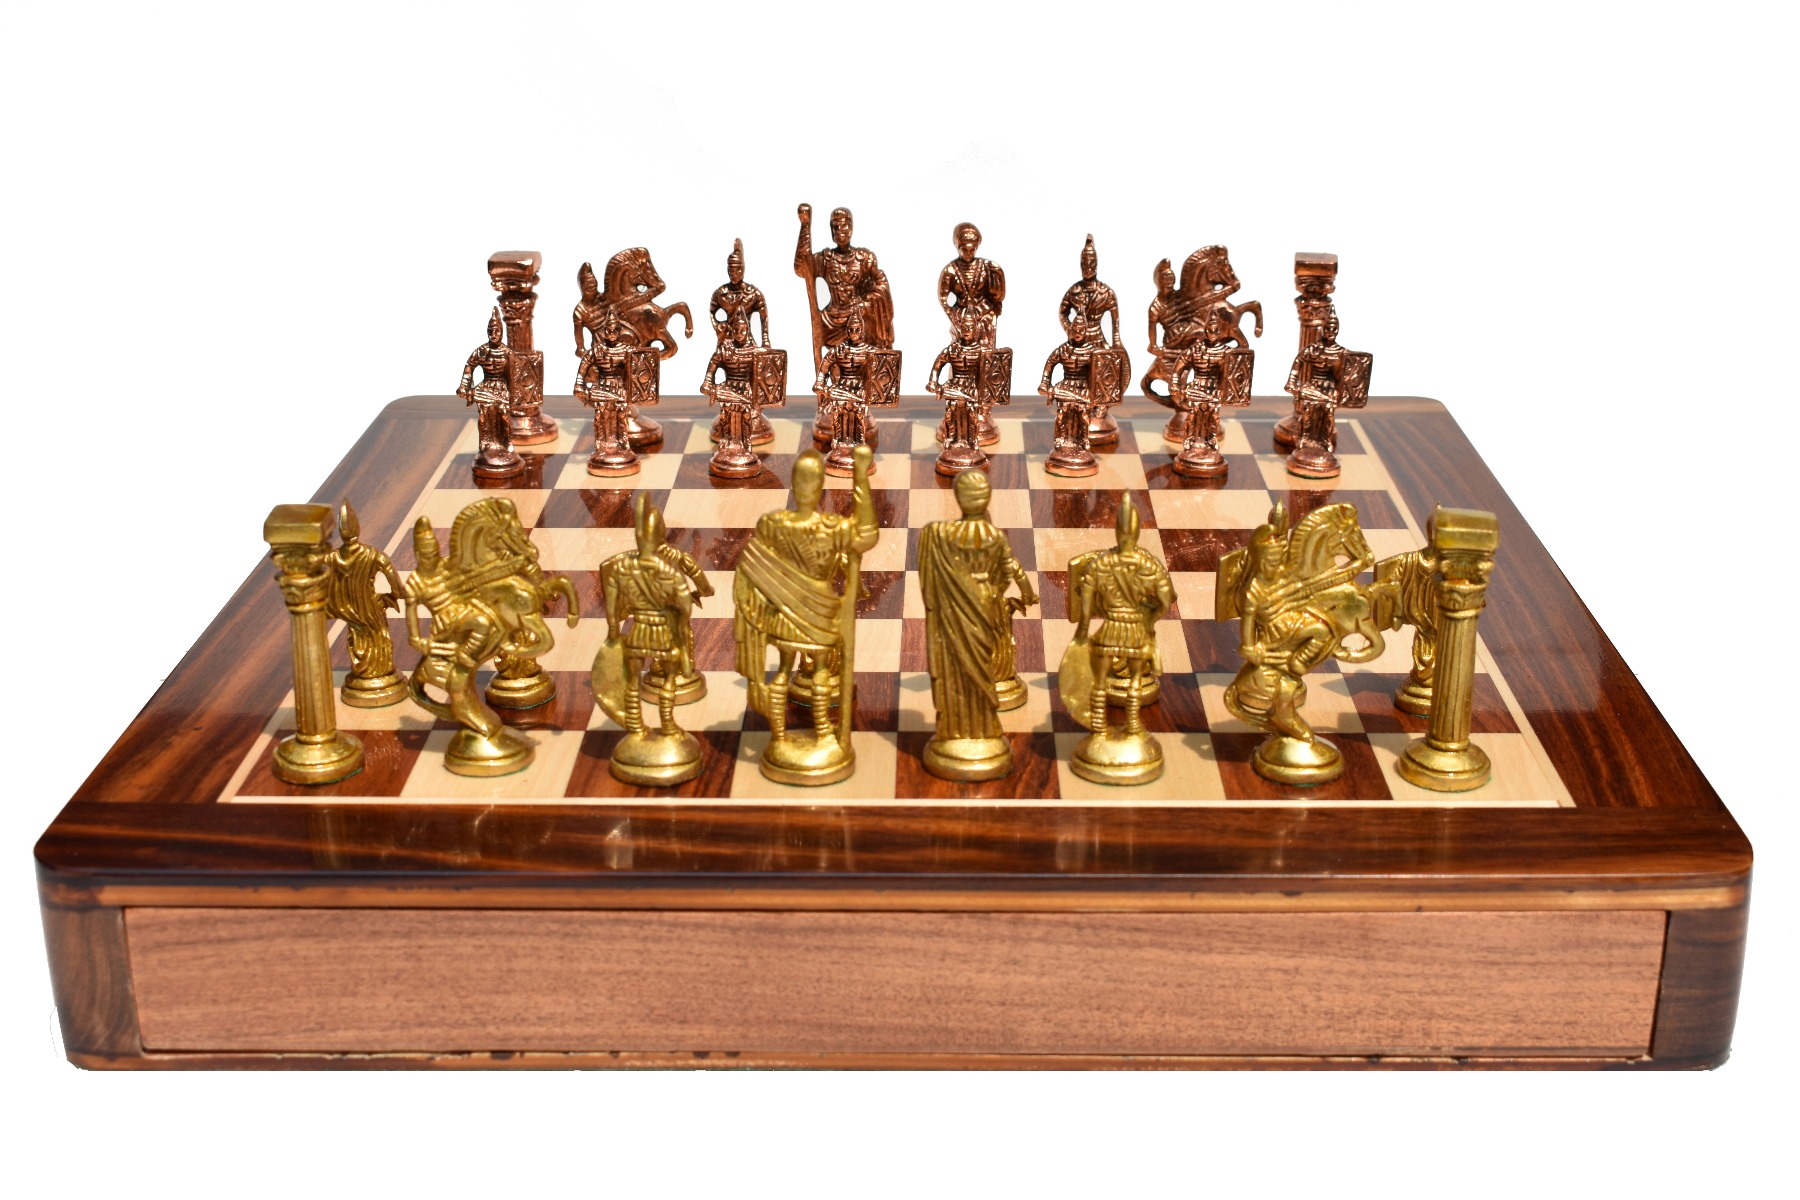 Canada - Chess set - Copper and wood - Catawiki